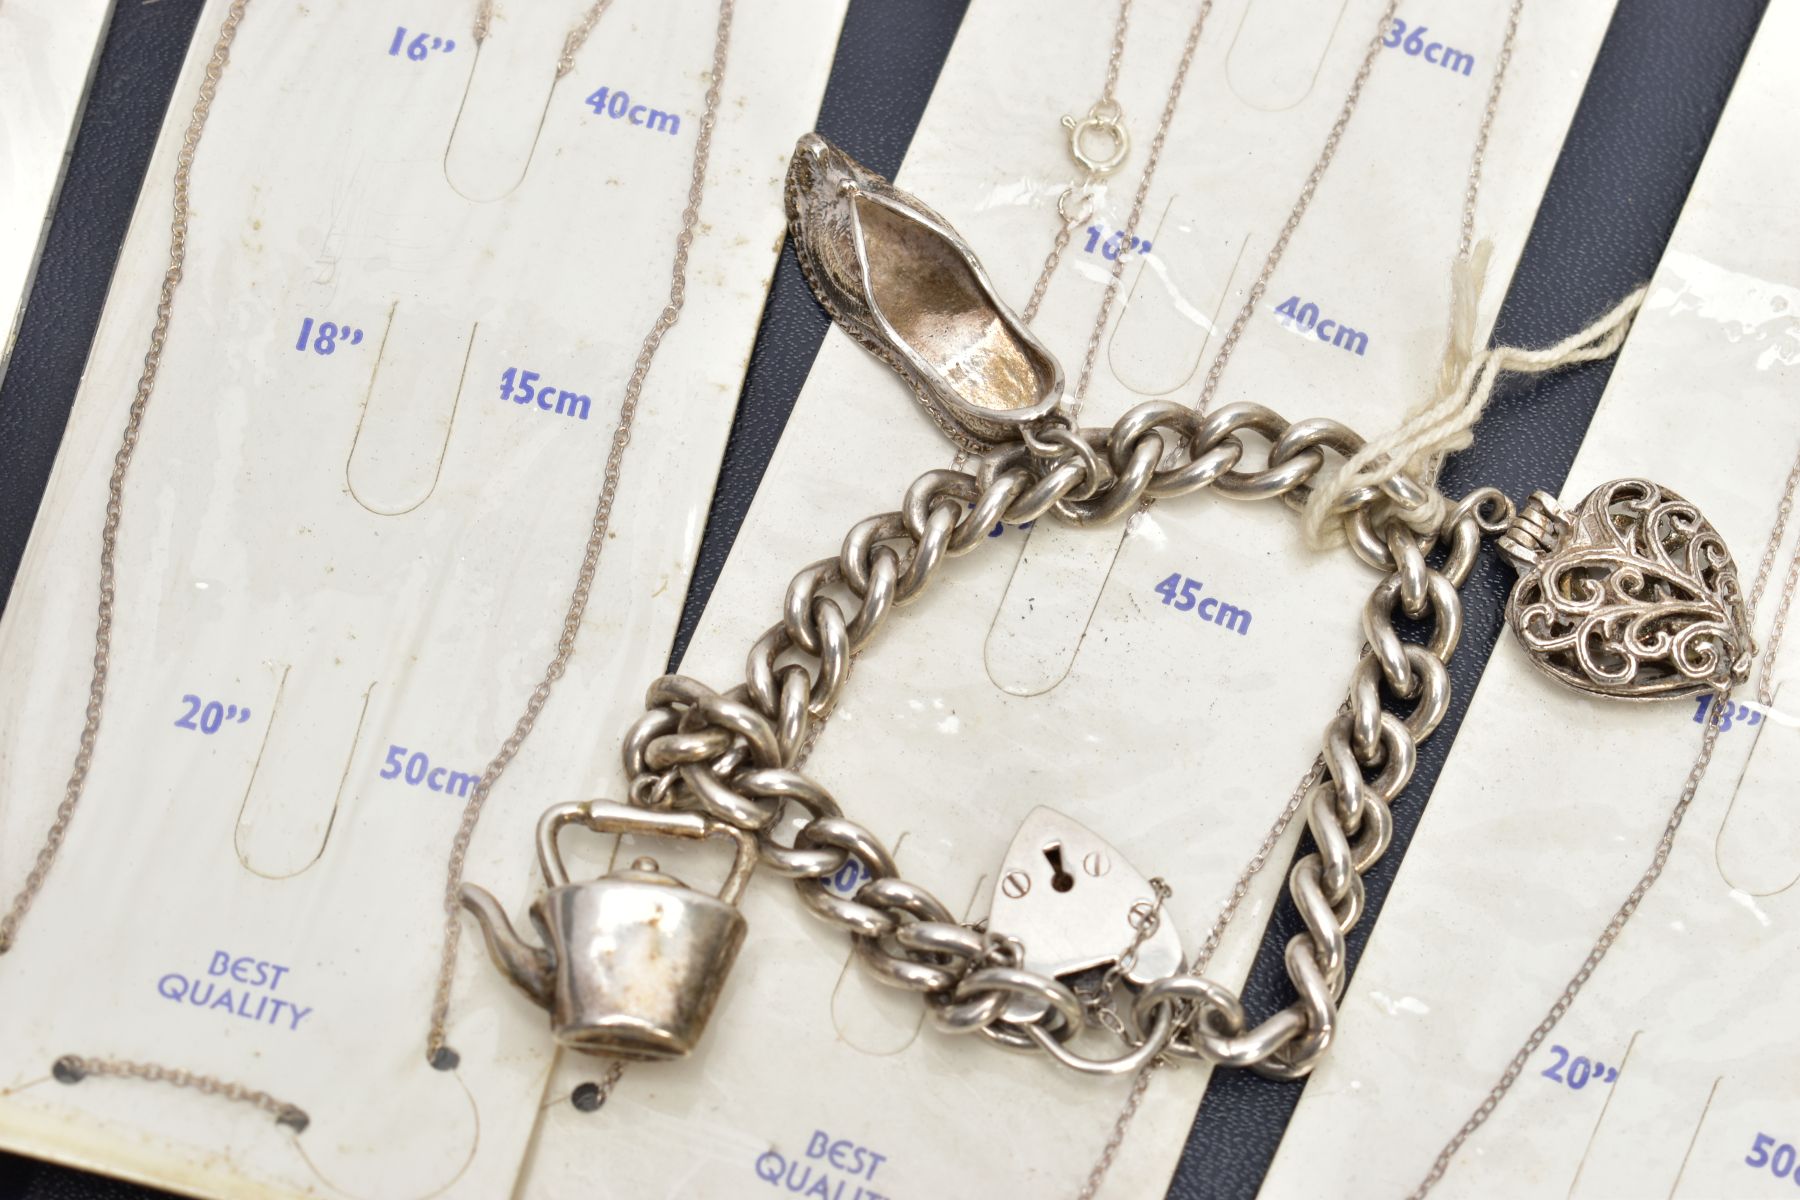 A SELECTION OF PACKAGED CHAINS, FLAT HERINGBONE CHAIN AND A CHARM BRACELET, the bracelet with four - Image 4 of 5